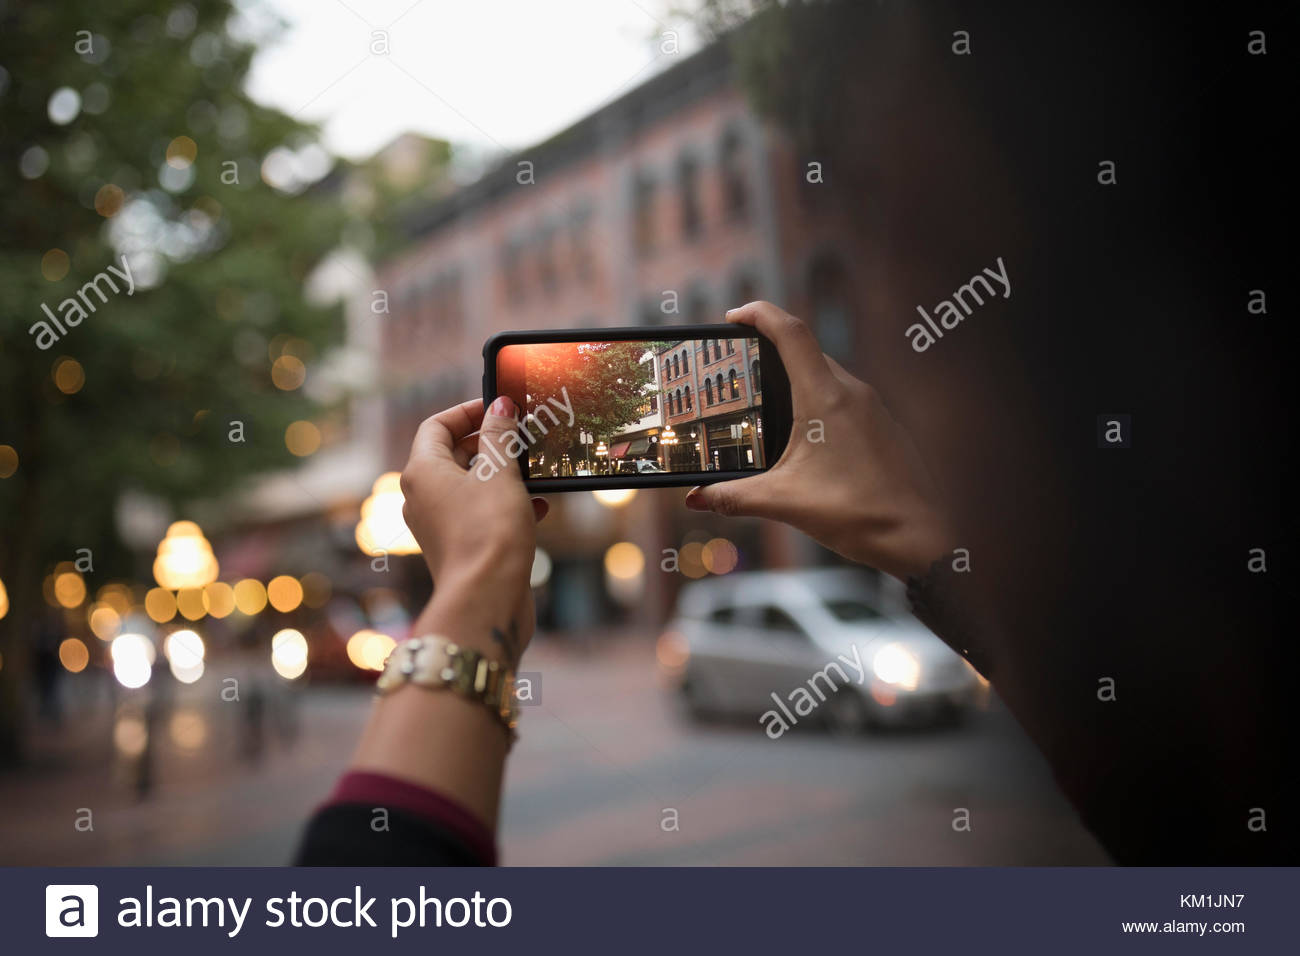 Over the shoulder view woman using camera phone, photographing urban night street Stock Photo